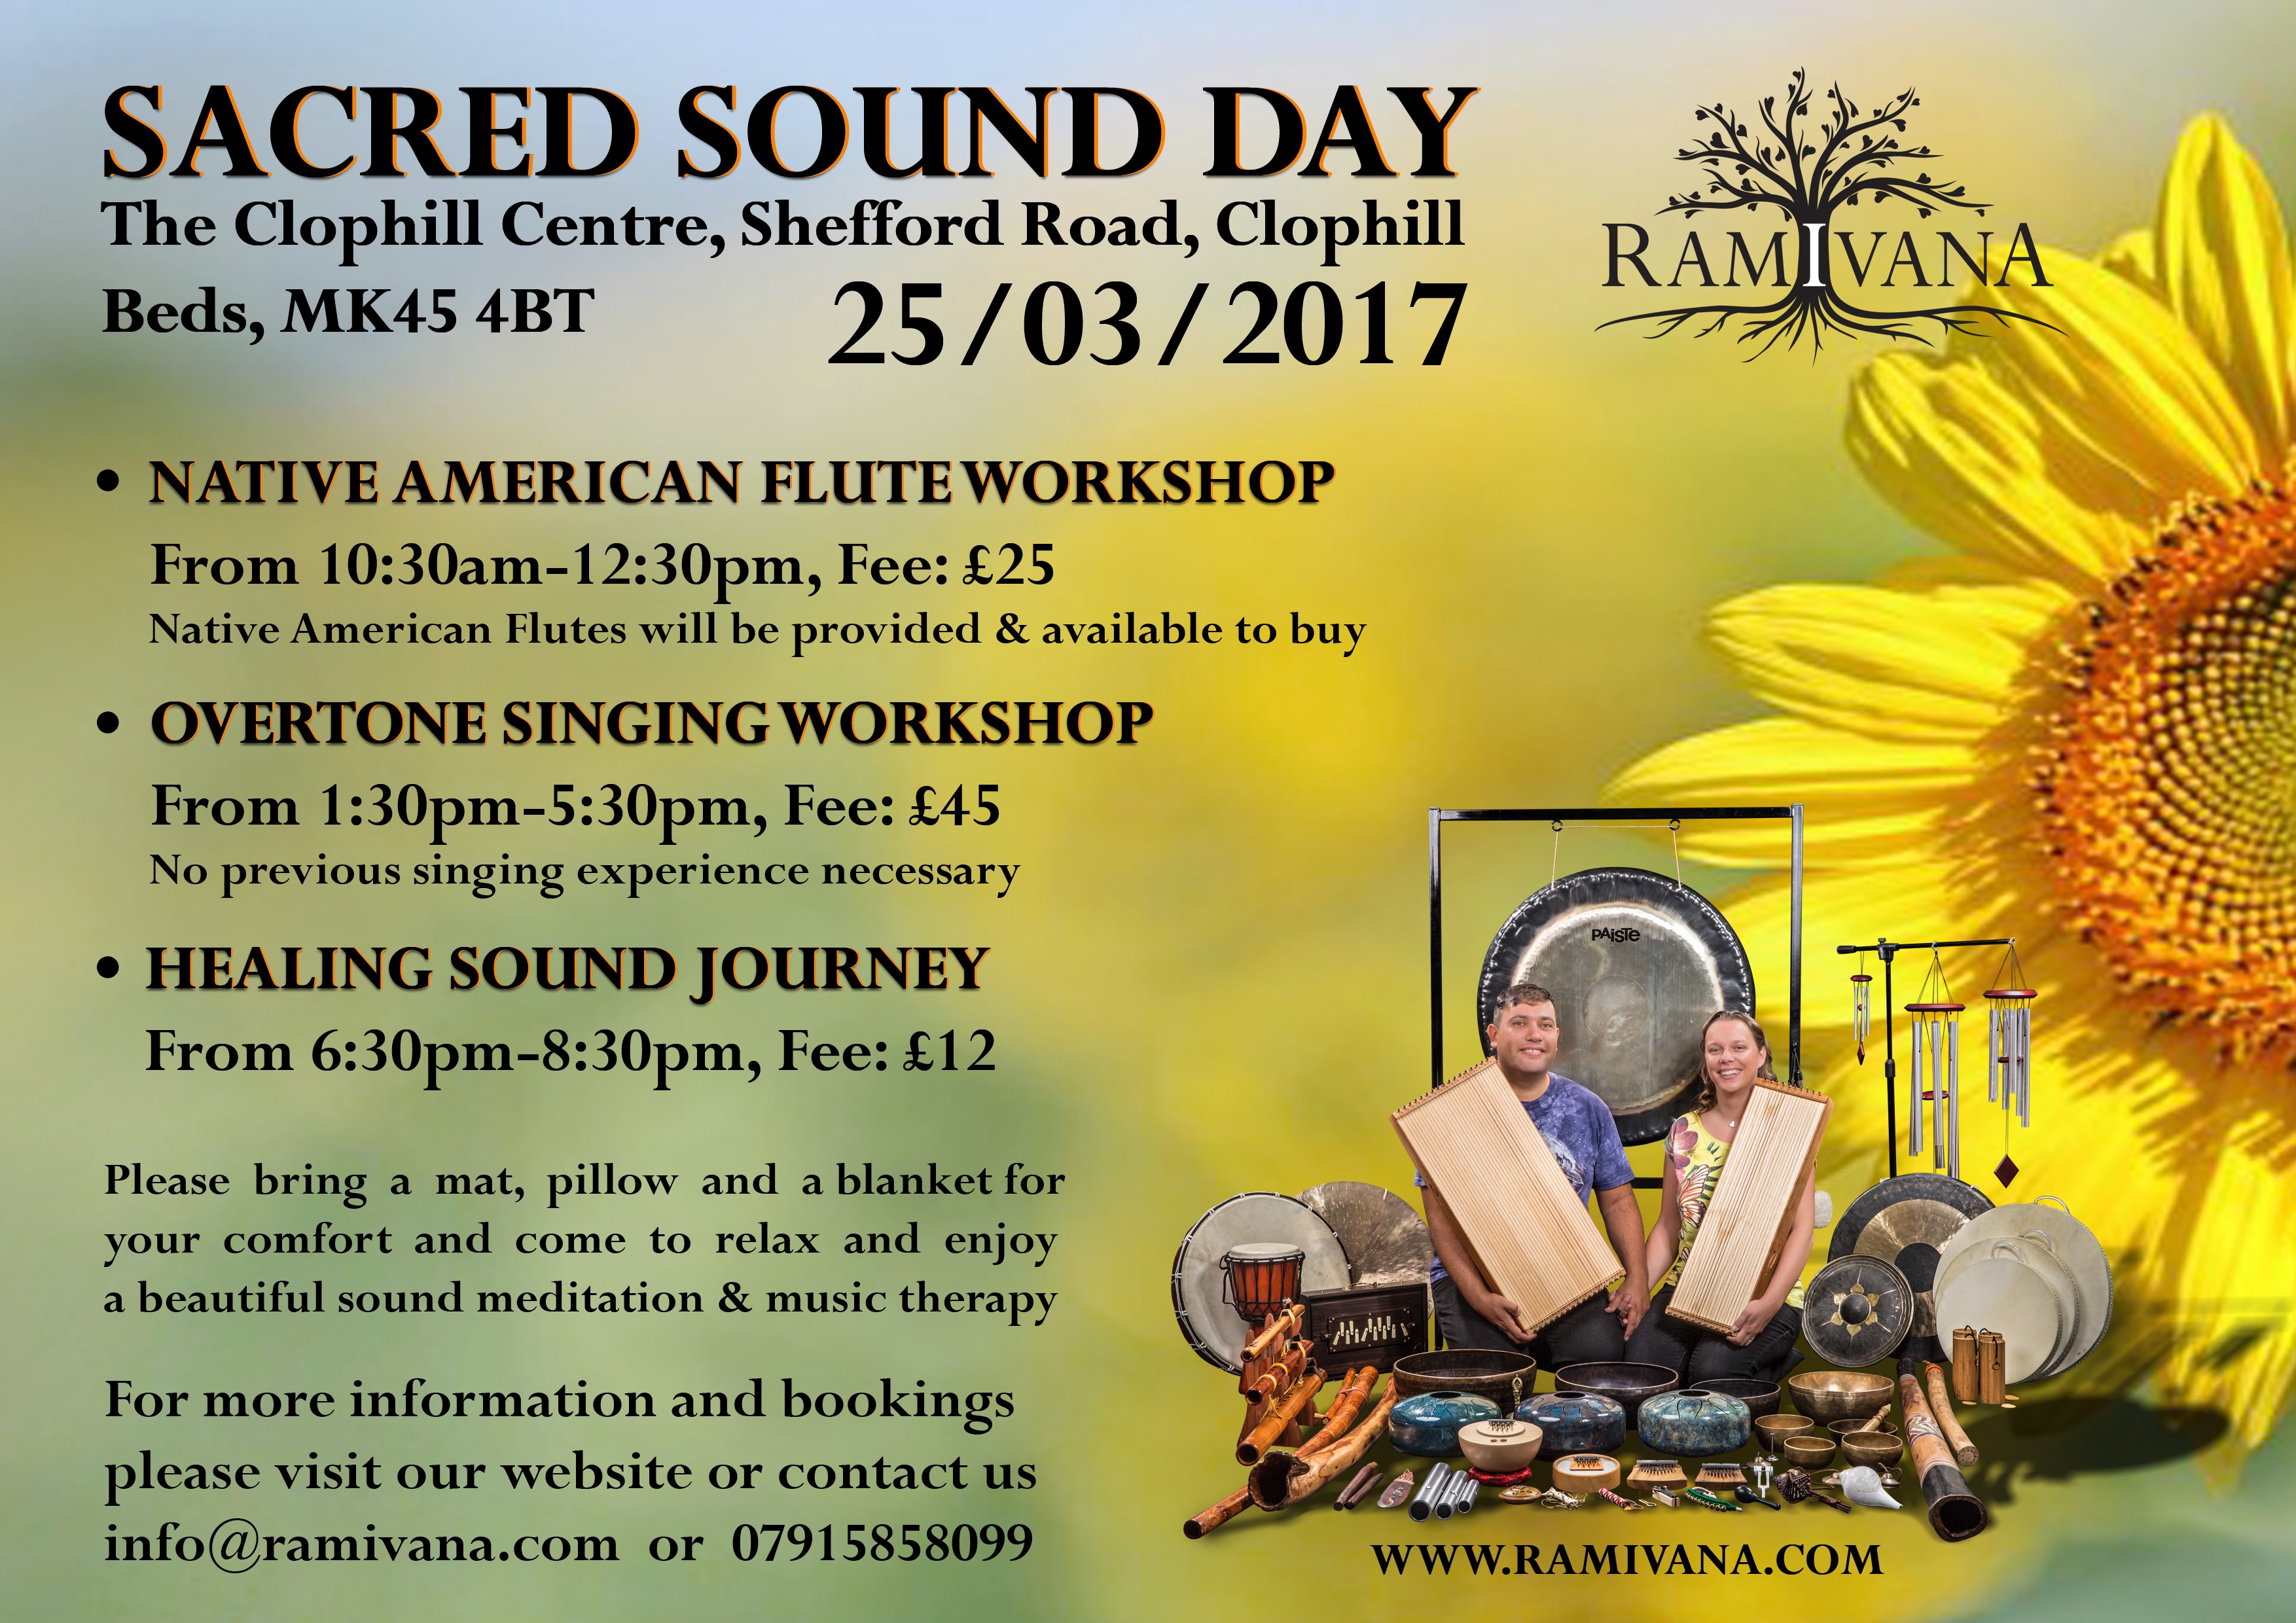 BEDFORDSHIRE - SACRED SOUND DAY HOW TO OVERTONE SING